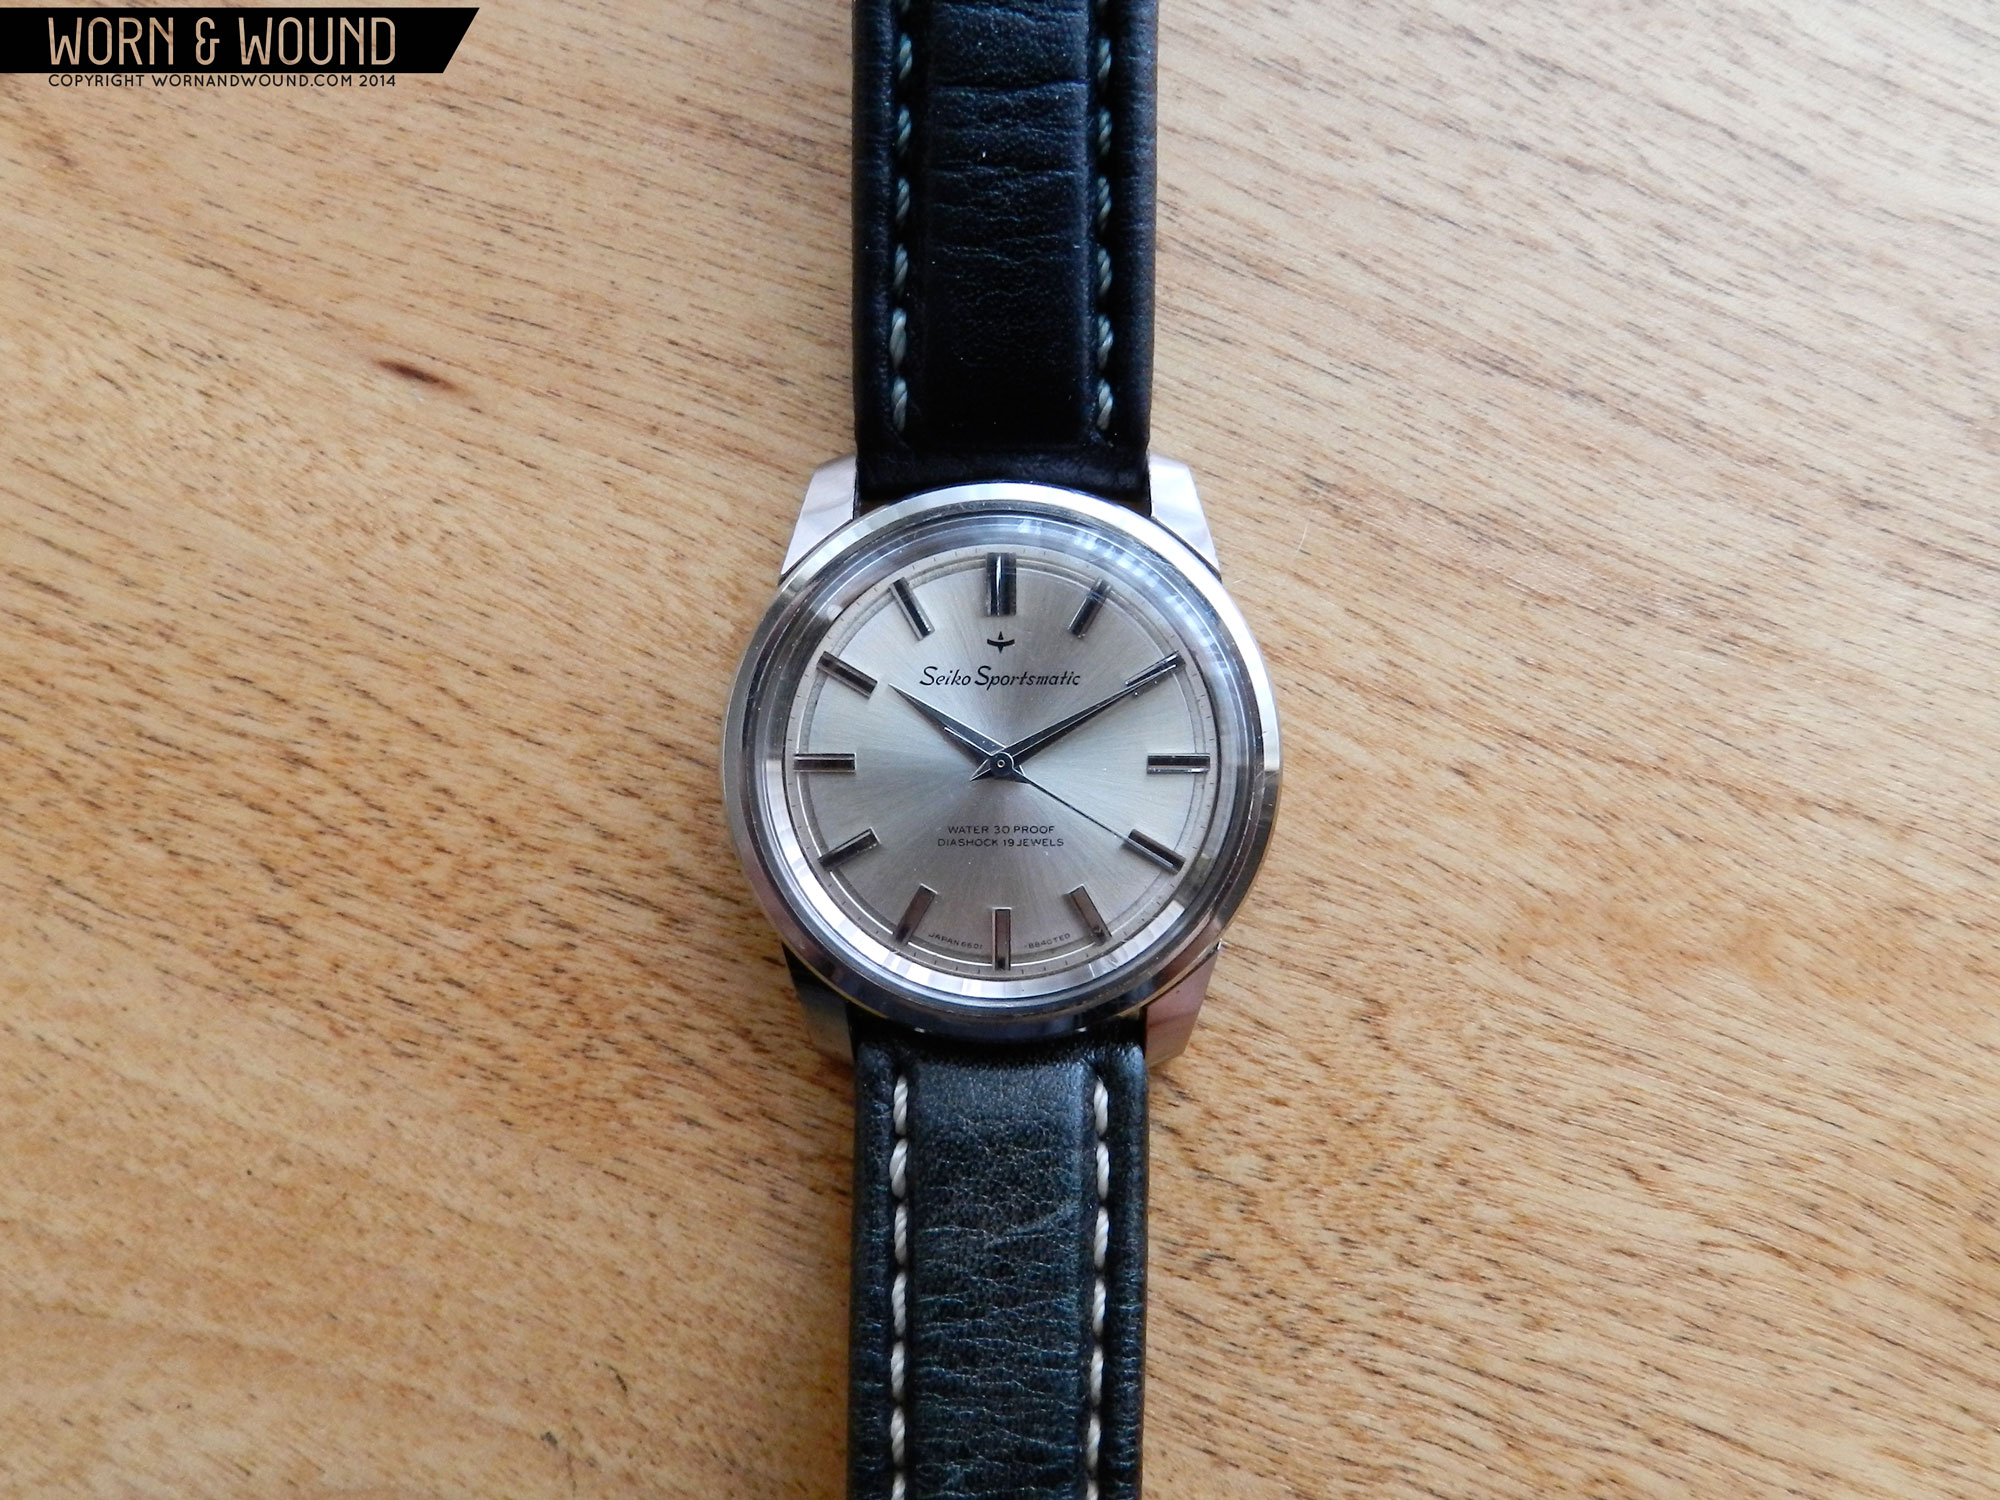 Affordable Vintage: 60's Seiko Sportsmatic - Worn & Wound